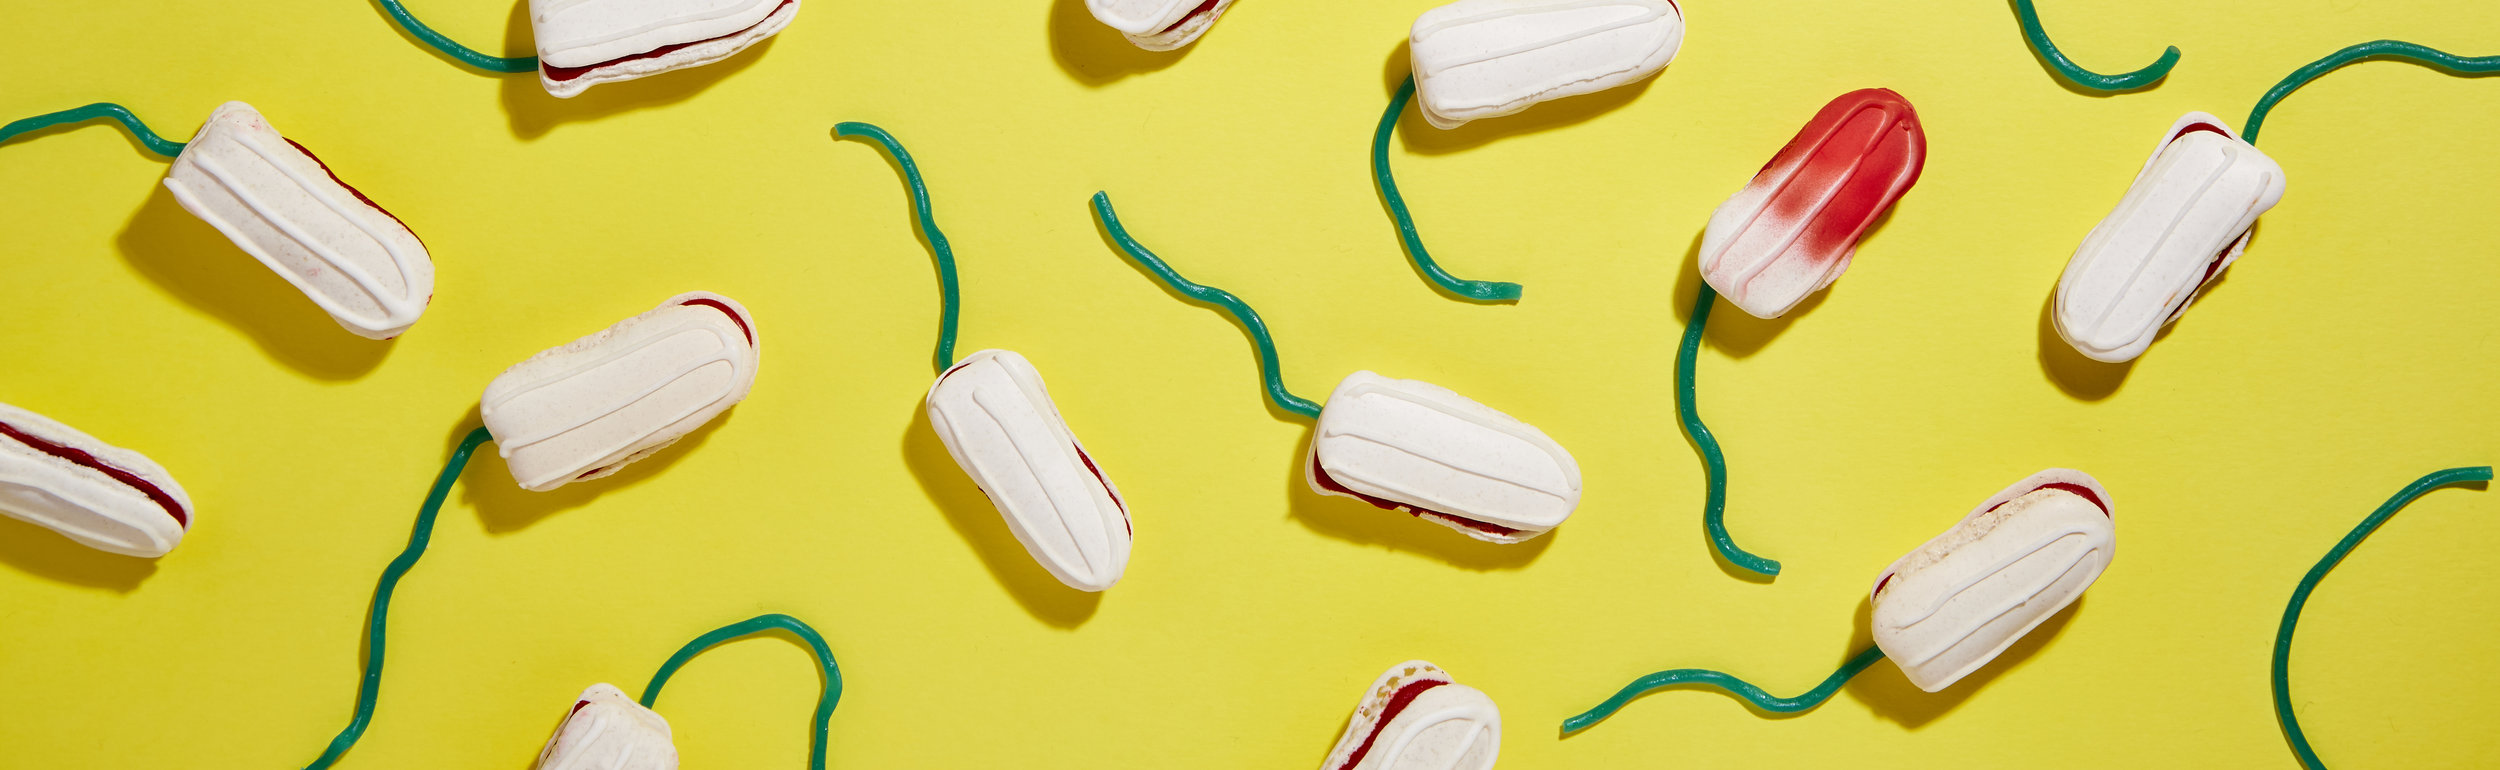 Tampon Macarons for Bloody Good Period